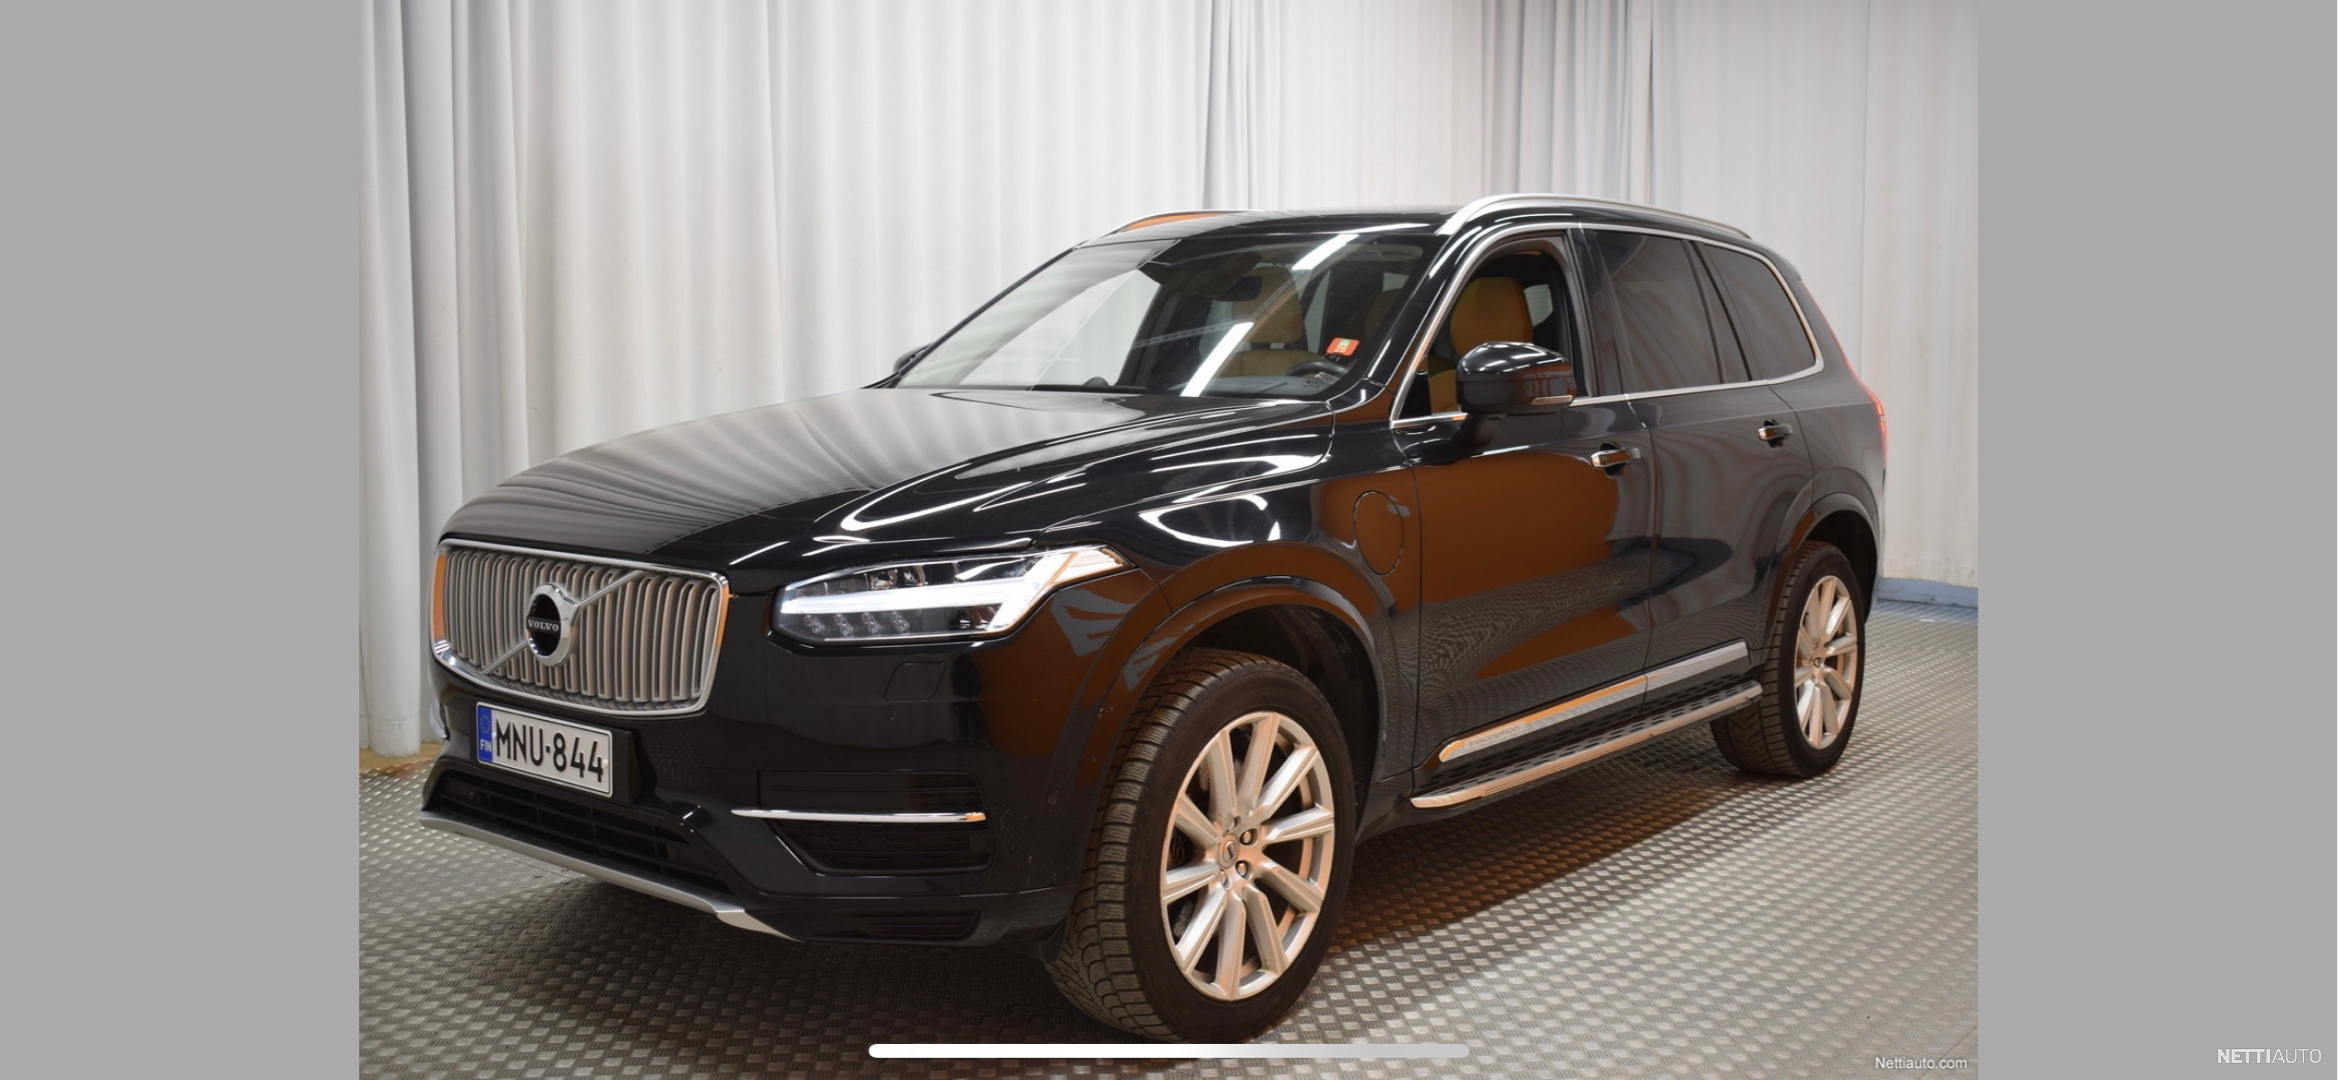 XC90 Twin Engine Symbols and messages for electronic stability control